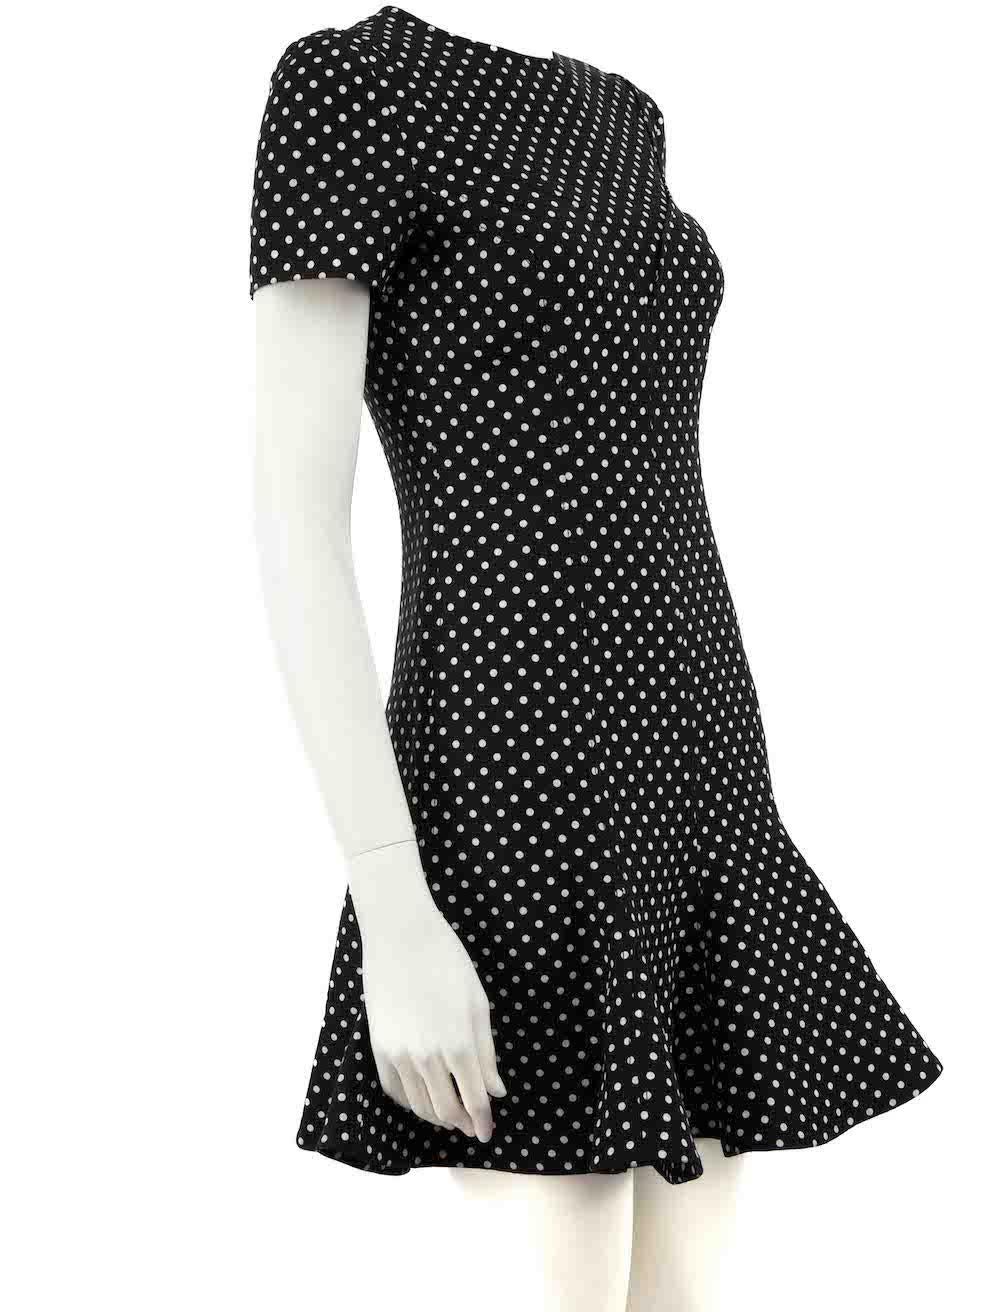 CONDITION is Very good. Hardly any visible wear to dress is evident on this used Valentino designer resale item.
 
 Details
 Black
 Wool
 Knee length dress
 Polkadot pattern
 Round neckline
 Short sleeves
 Back zip closure with hook and eye
 
 
